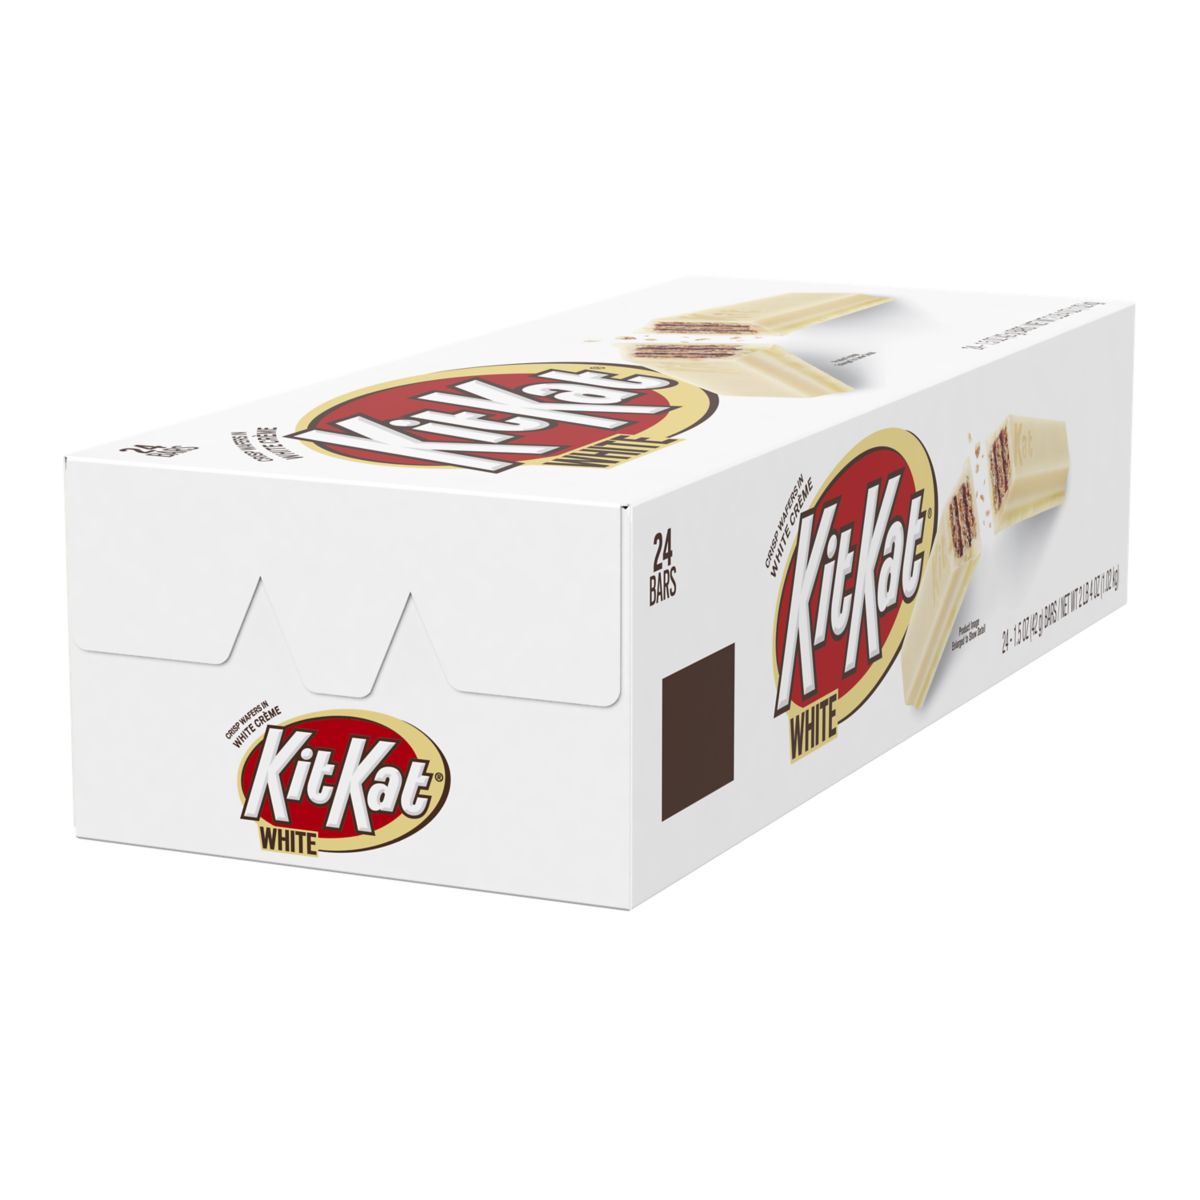  Nestle Kit Kat Chocolate Candy Bars, 1.5 Oz (Pack of 12) by  CANDY CABIN (White) : Grocery & Gourmet Food